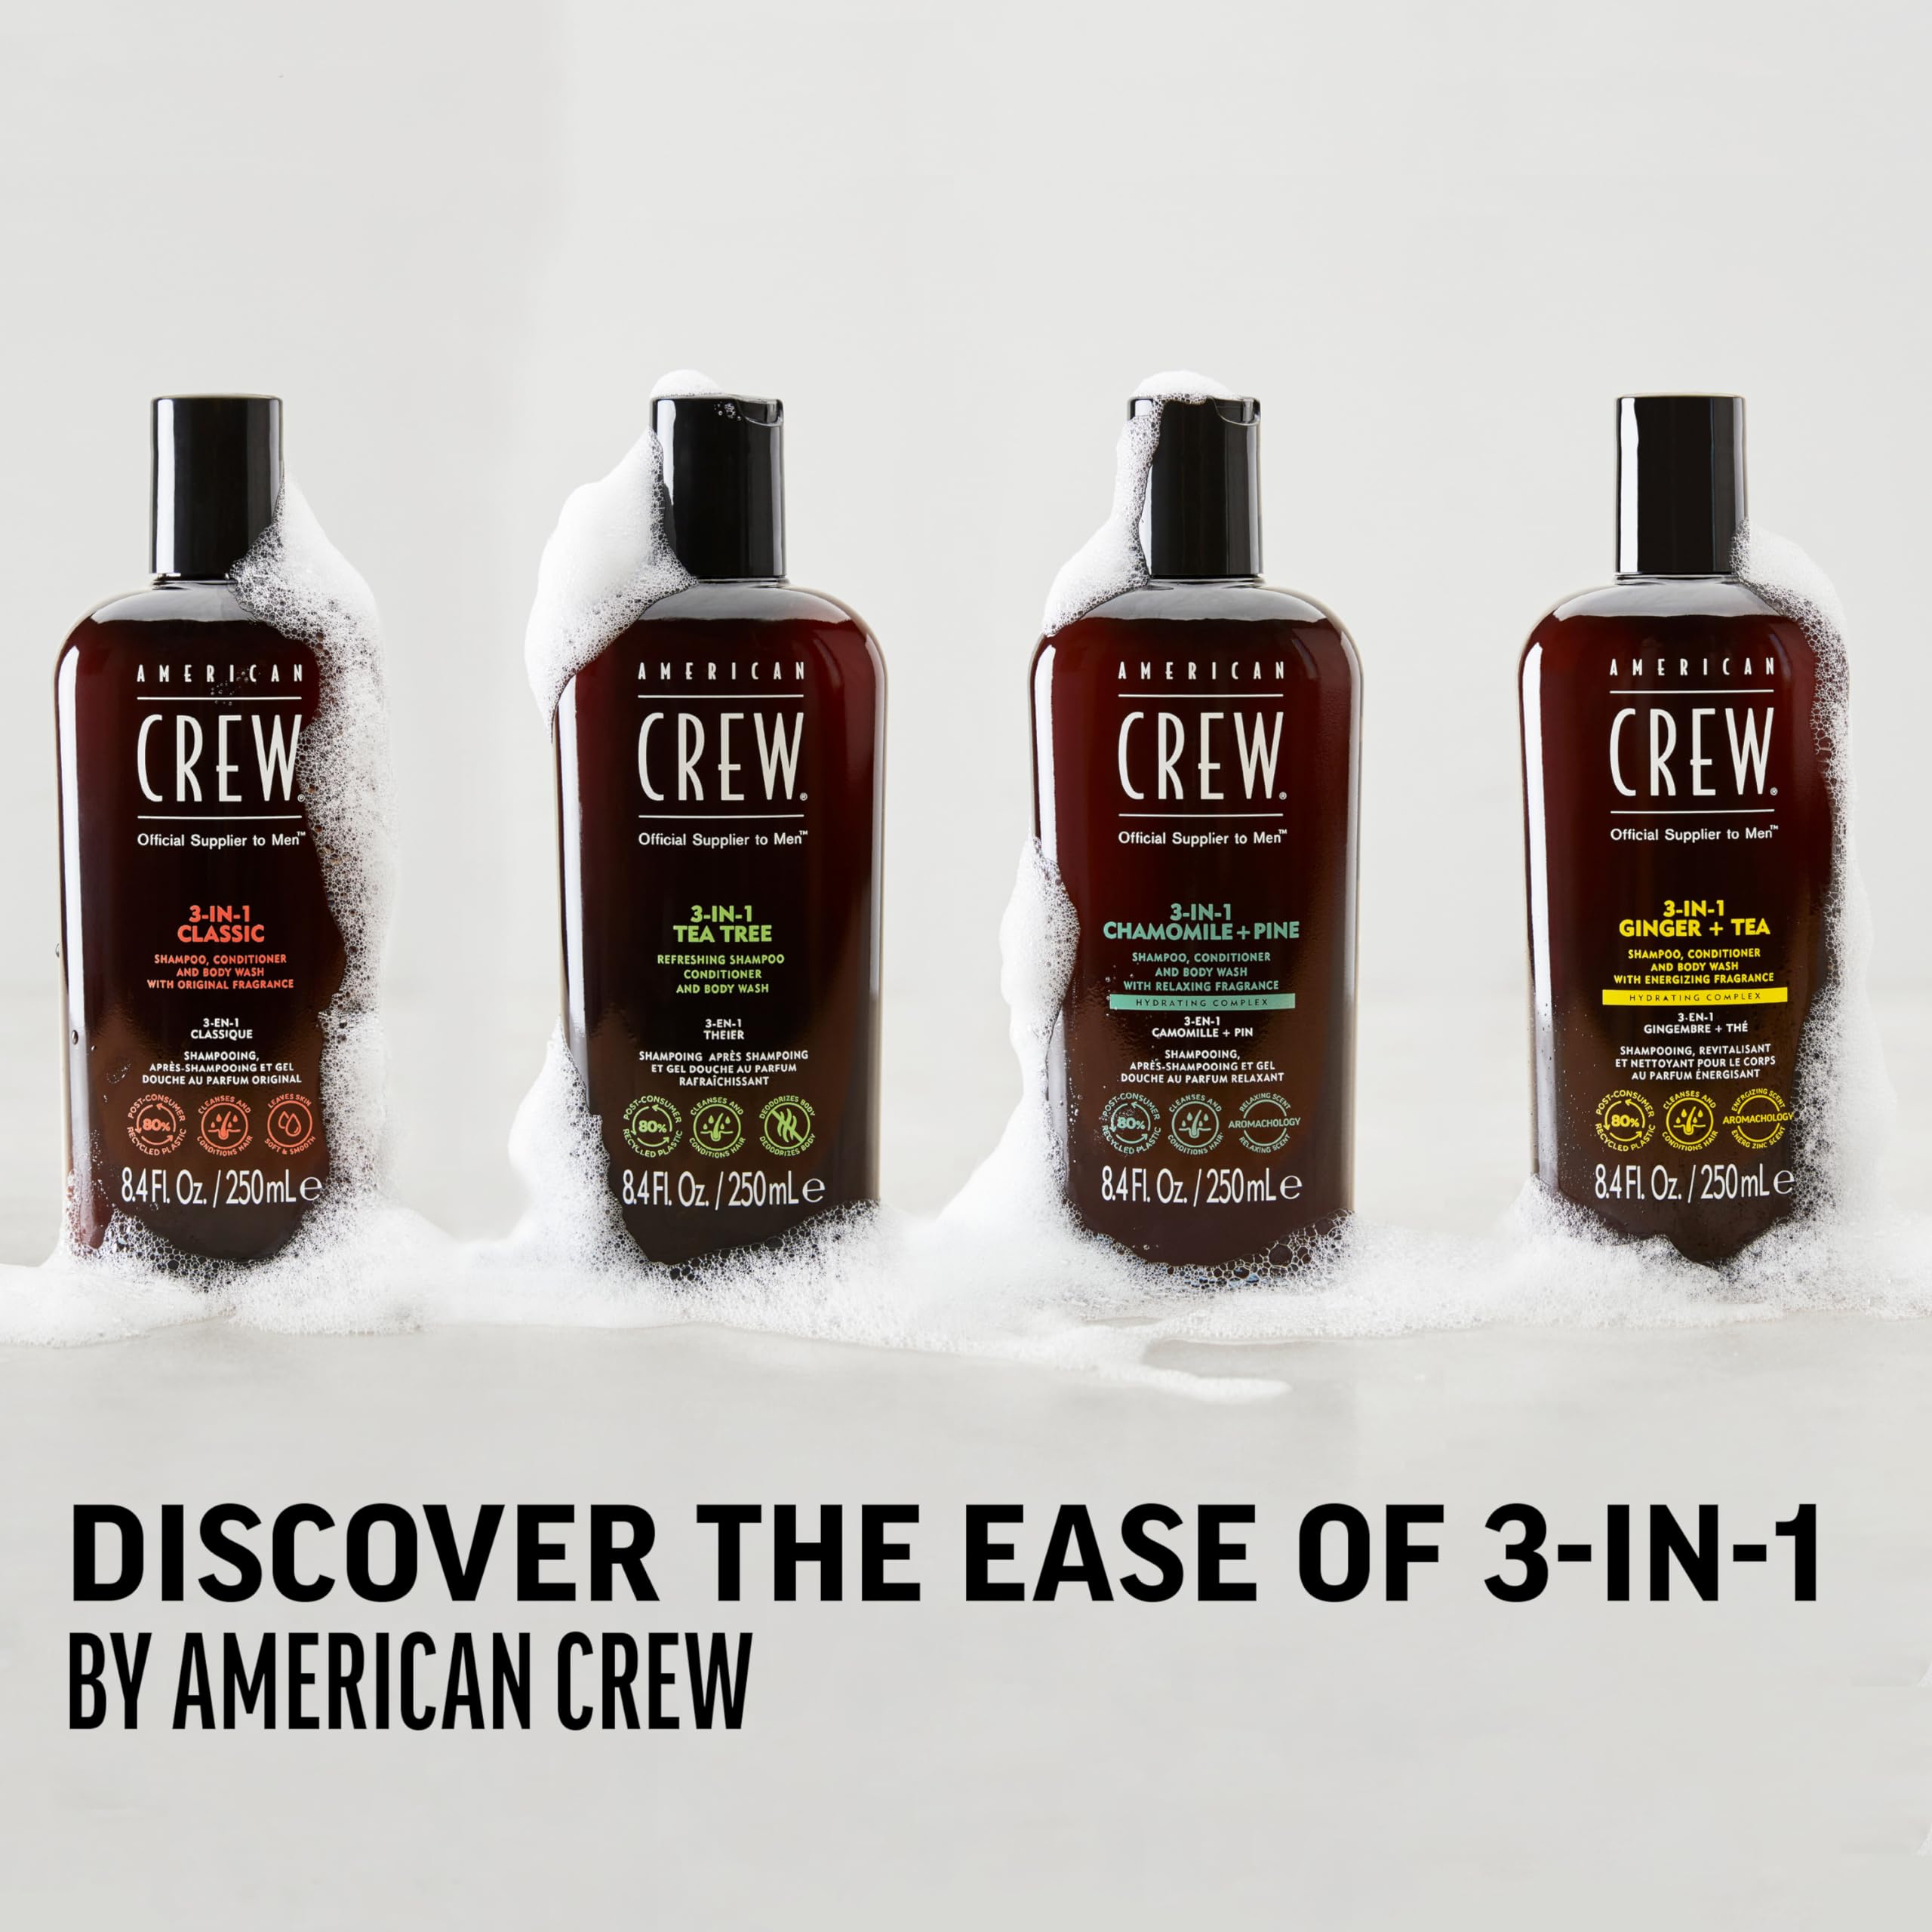 American Crew 3-IN-1 GINGER + TEA Shampoo, Conditioner and Body Wash, 33.8 Fl Oz (Pack of 1)